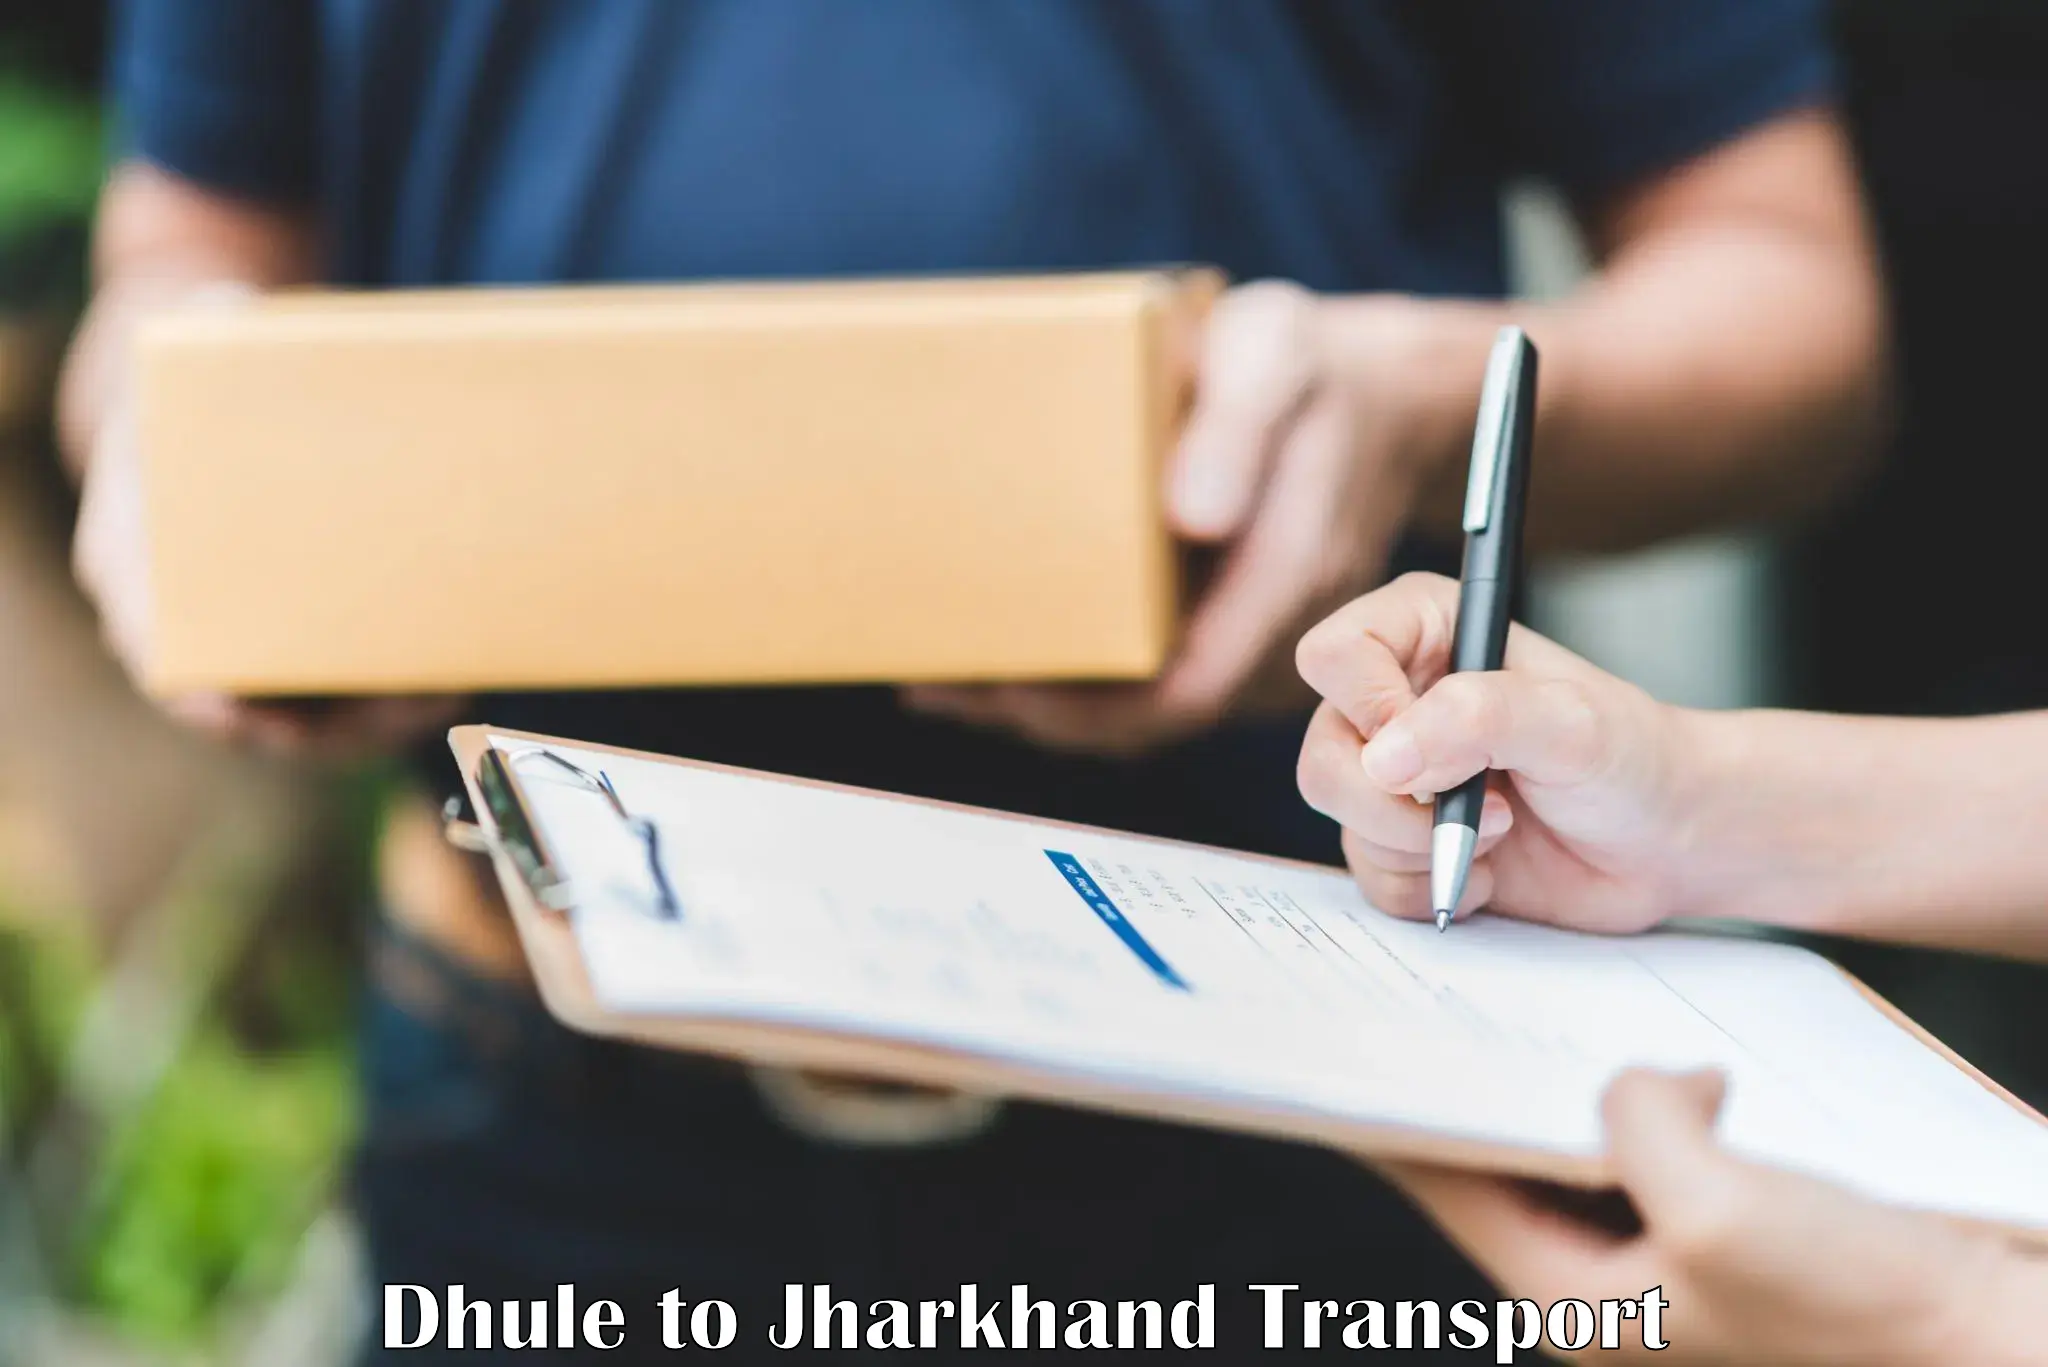 Cycle transportation service Dhule to Jharkhand